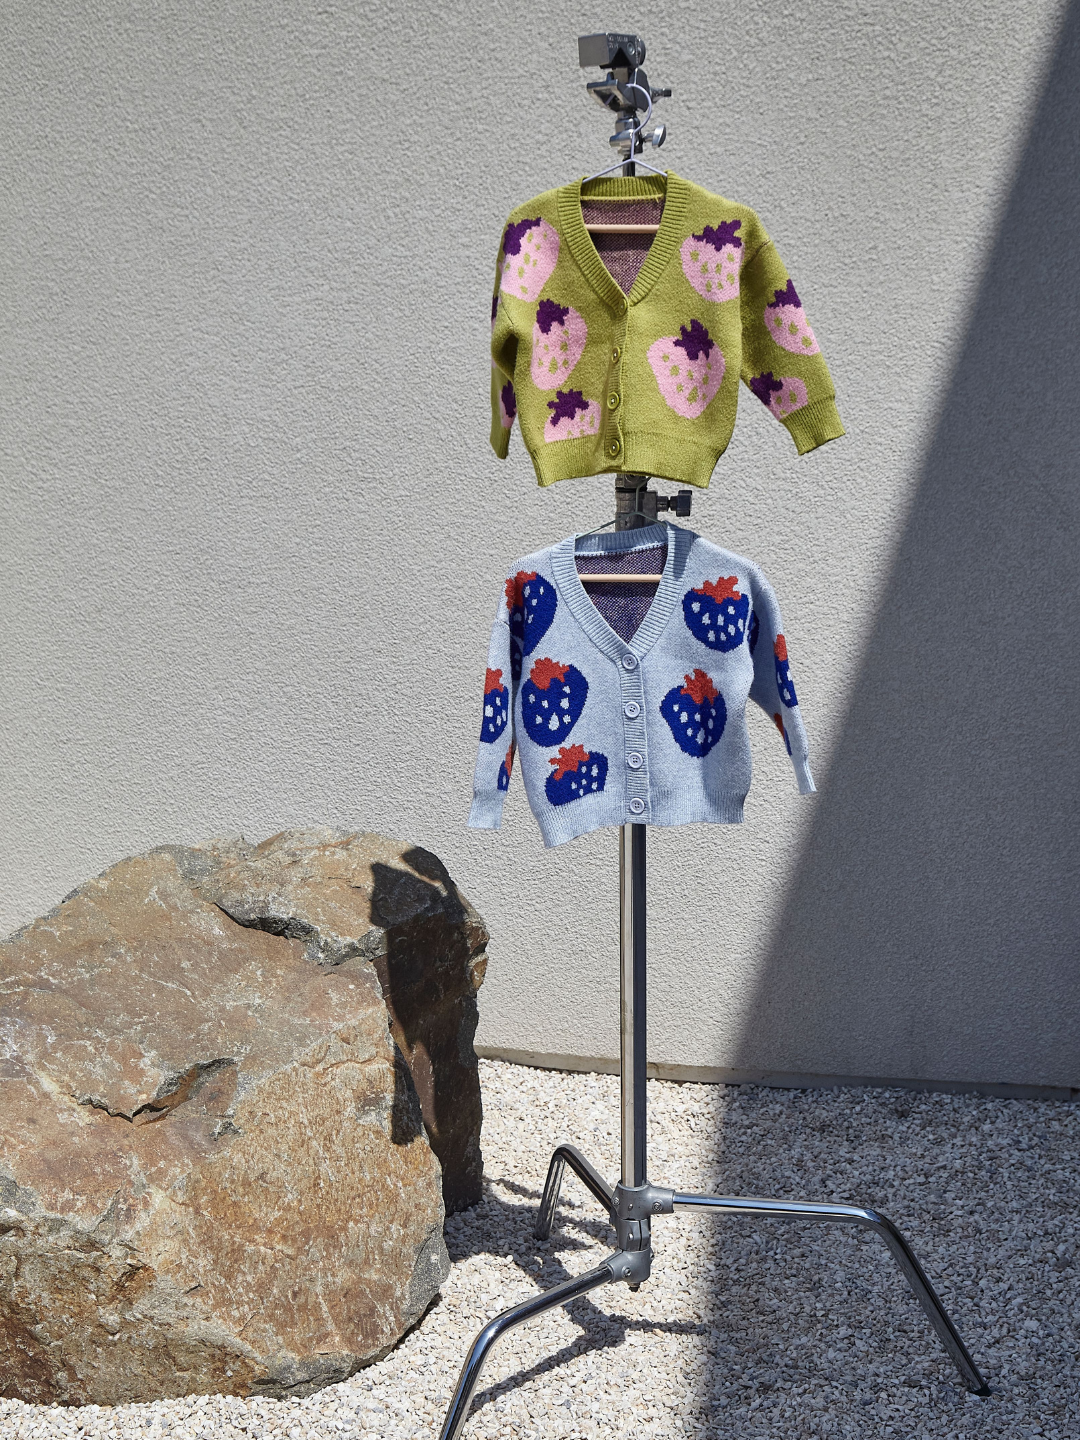 Two kids v-neck cardigans, shown on hangers, hanging from a metal photography stand, in an outdoor space with a gravel floor, a large rock and grey wall. The lower cardigan is light blue with an all-over pattern of large blue strawberries with a red leaf. The cardigan hanging directly above is green with a pink strawberry with a purple leaf.